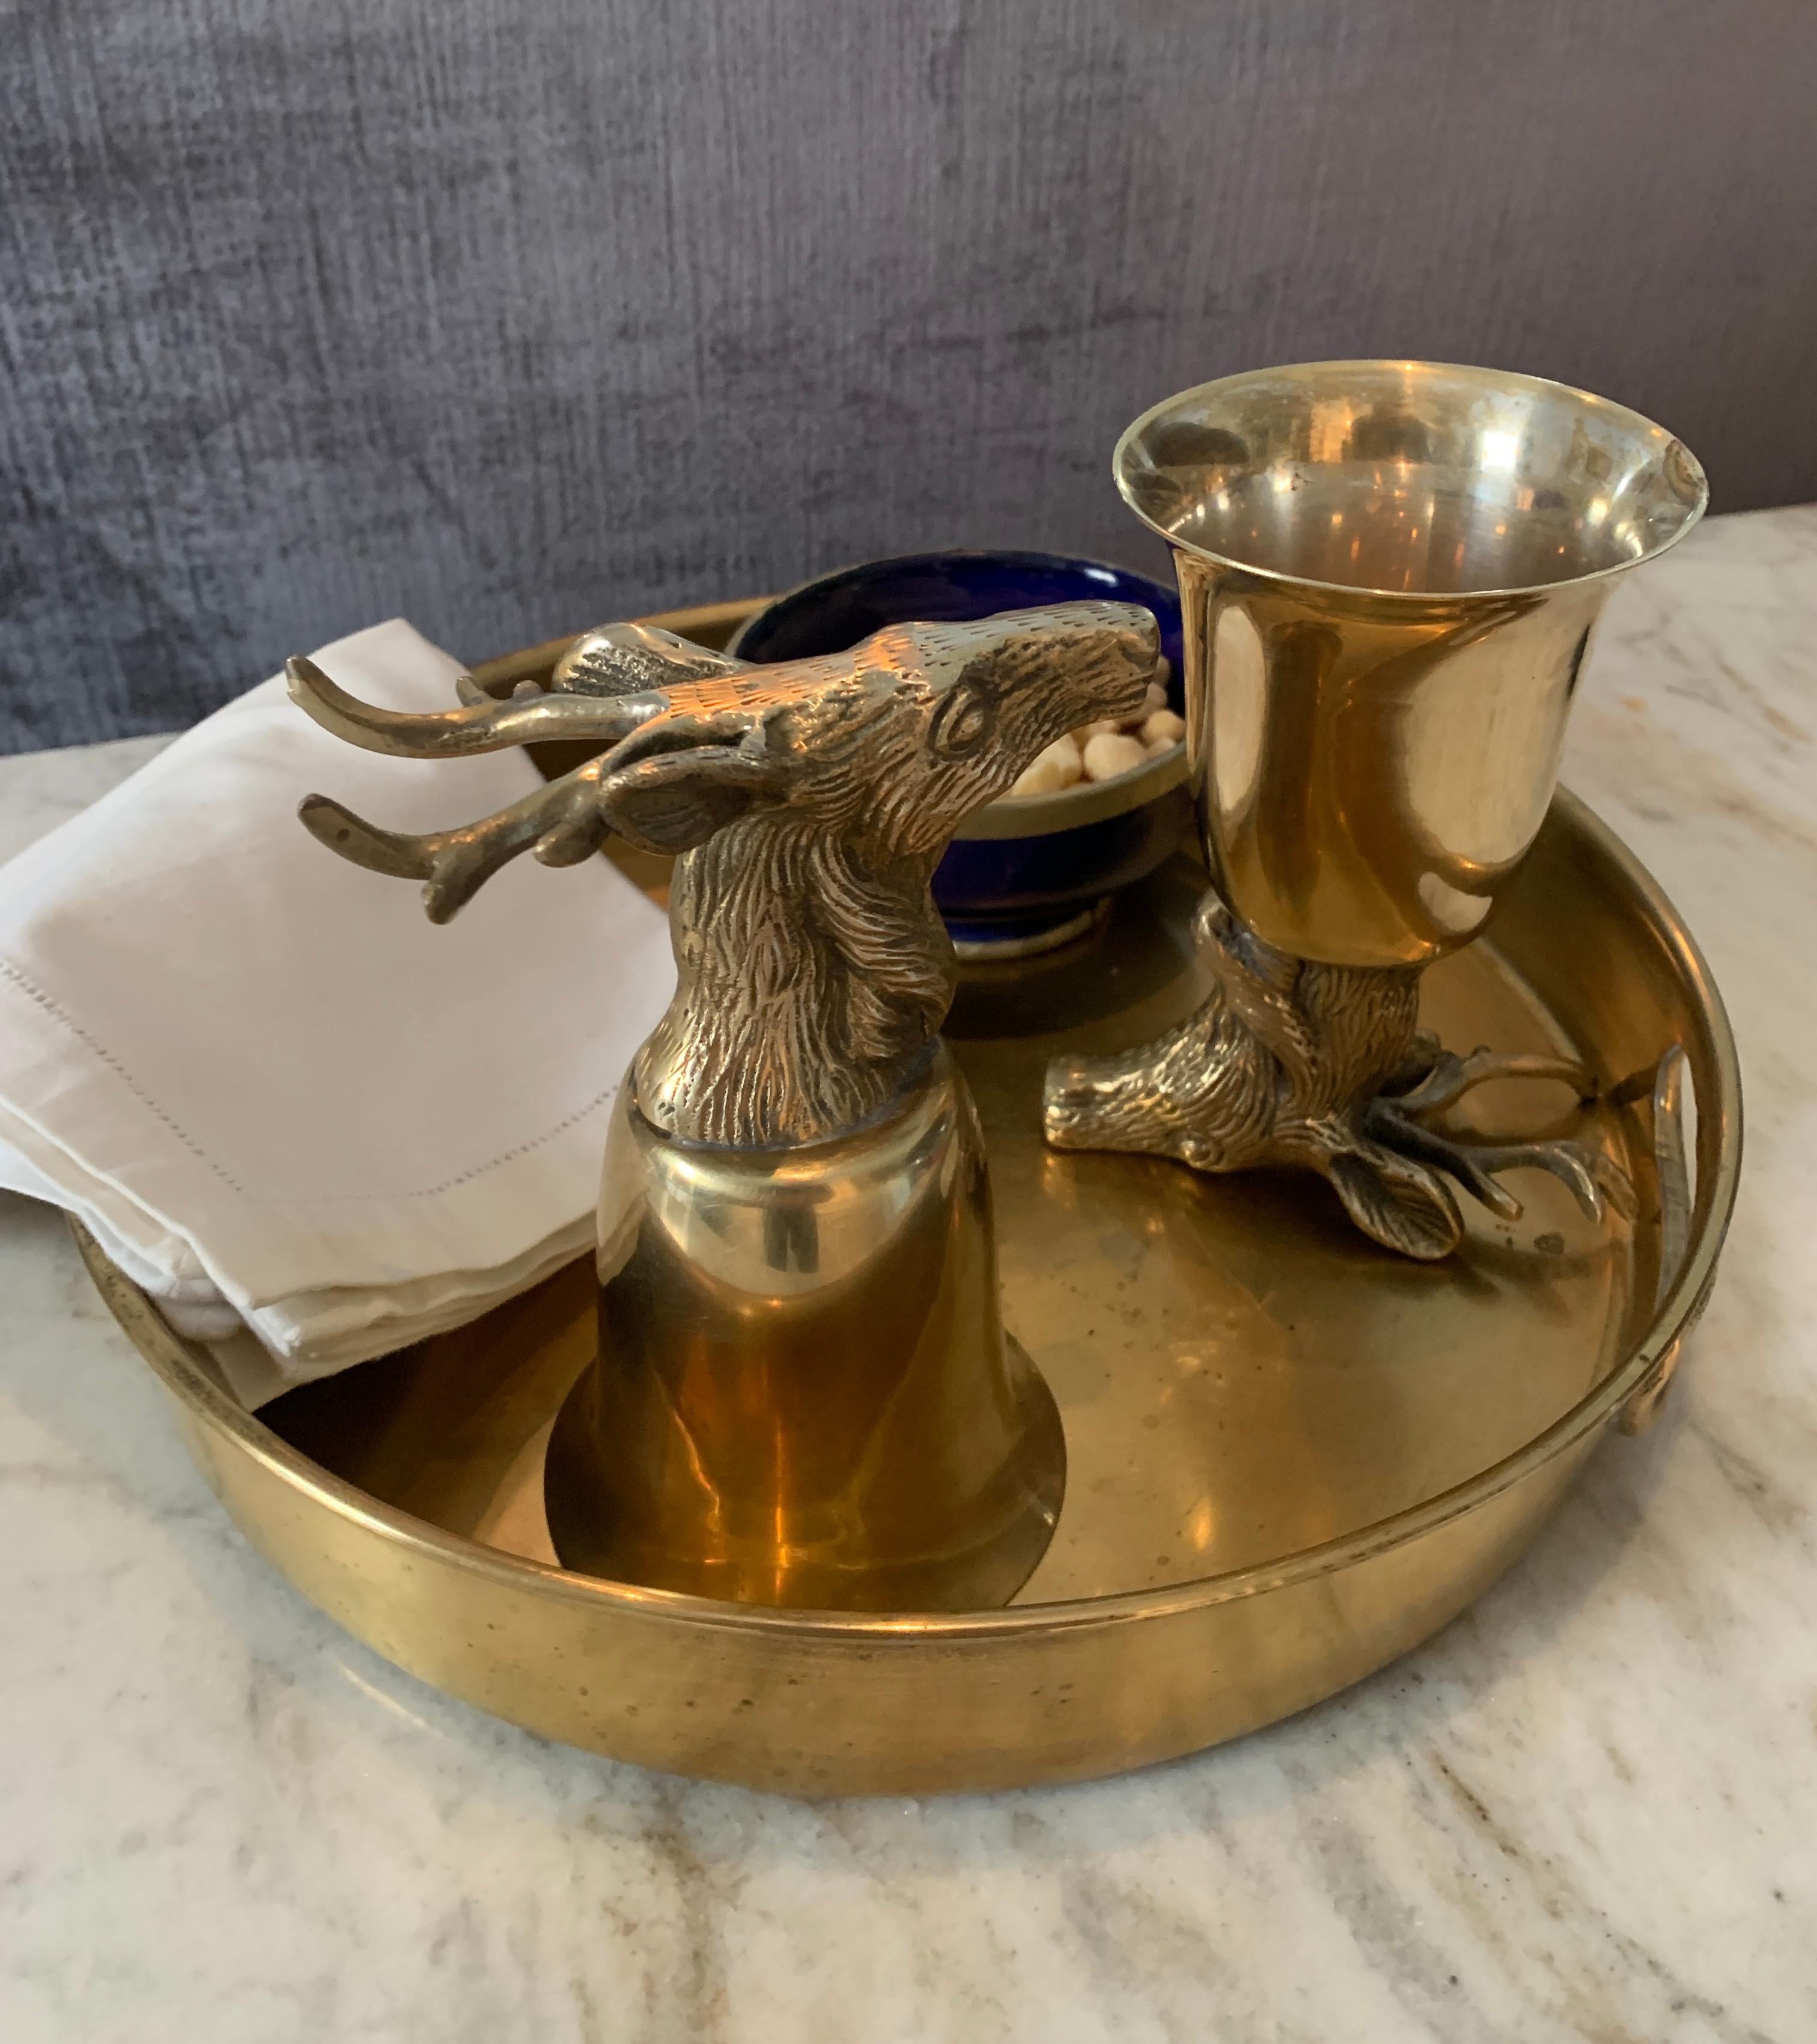 Wonderfully imaginative, the stag cups can be used as cups resting on the horns of the stag, or turned over for display. Perfectly suited for the Ralph Lauren or Rustic Bar - a creative way to present your drinks, a nice conversation starter.